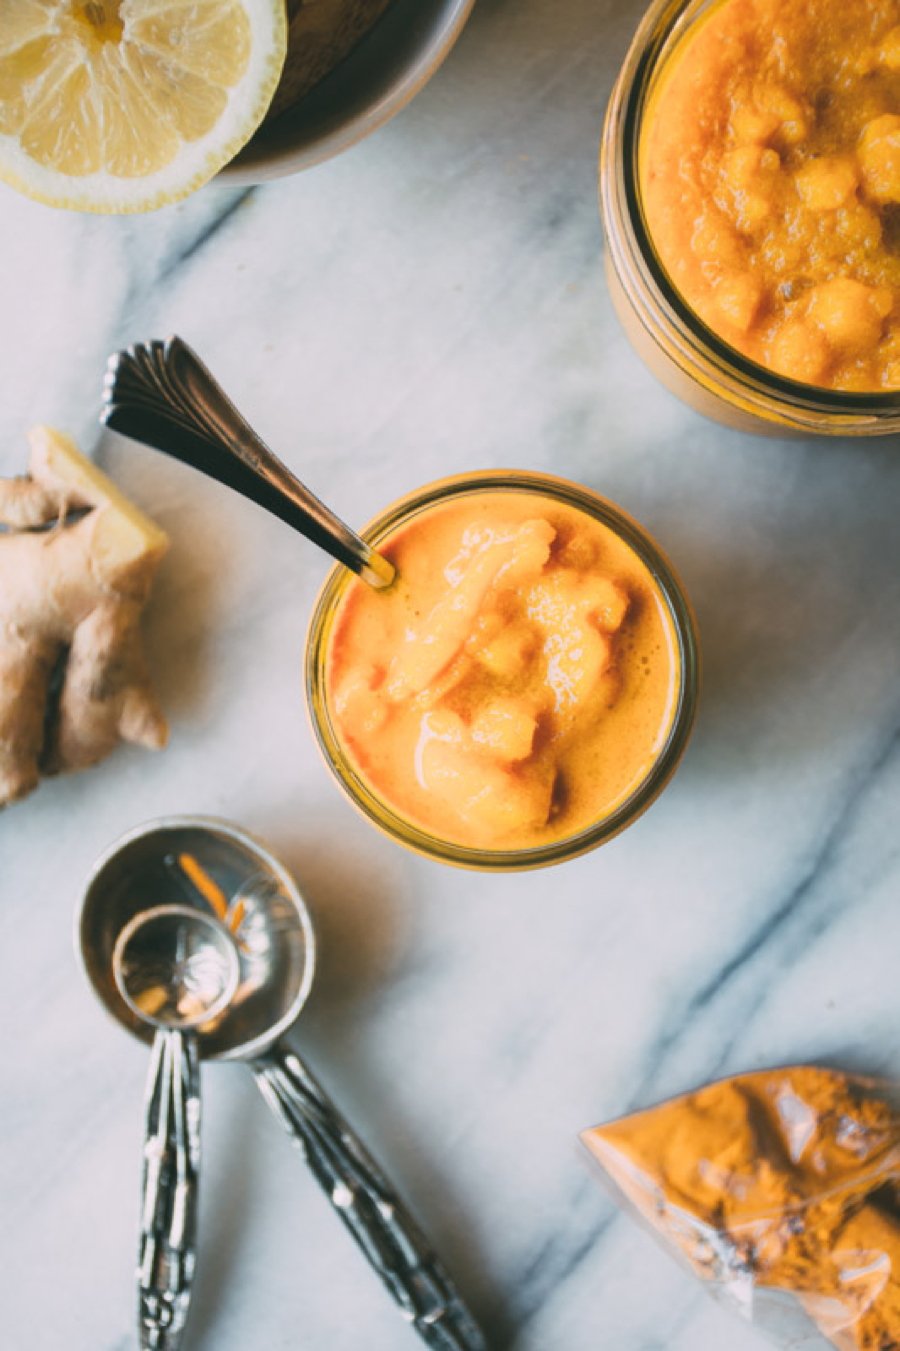 spicy animal slushy is healthy summer refreshment at its finest! this icy treat is made with fresh pressed apple cider, lemon juice, ginger, turmeric and cayenne - packed with anti-inflammatory and immune boosting goodness | www.nyssaskitchen.com